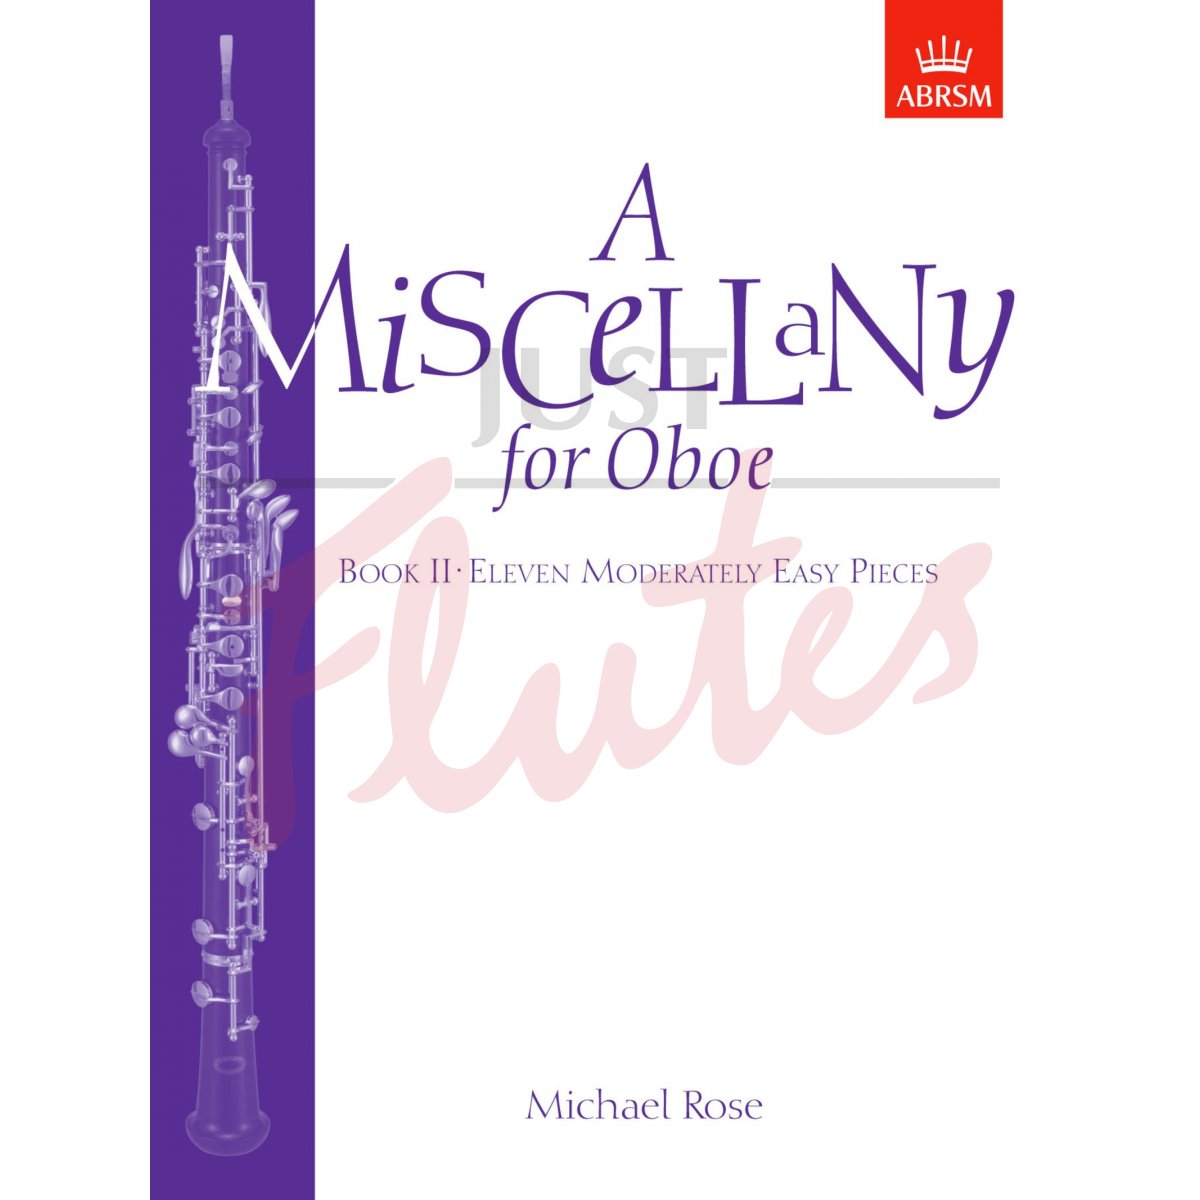 A Miscellany for Oboe Book 2